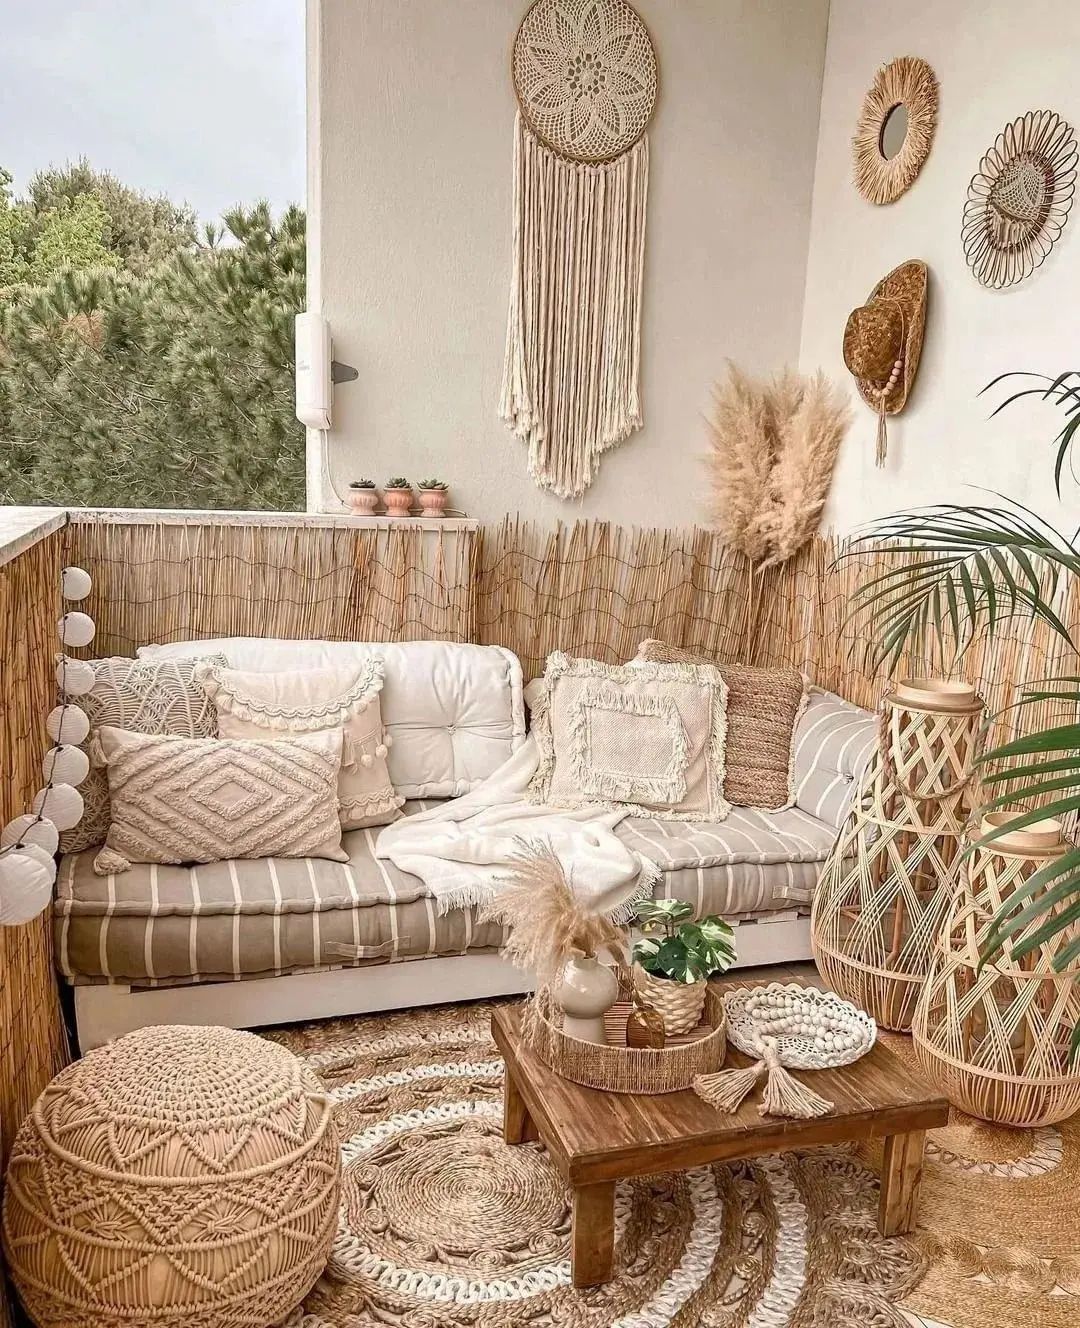 outdoor space such as this balcony can be styled with bohemian textures include an area rug to bring character and coziness to the outdoor space